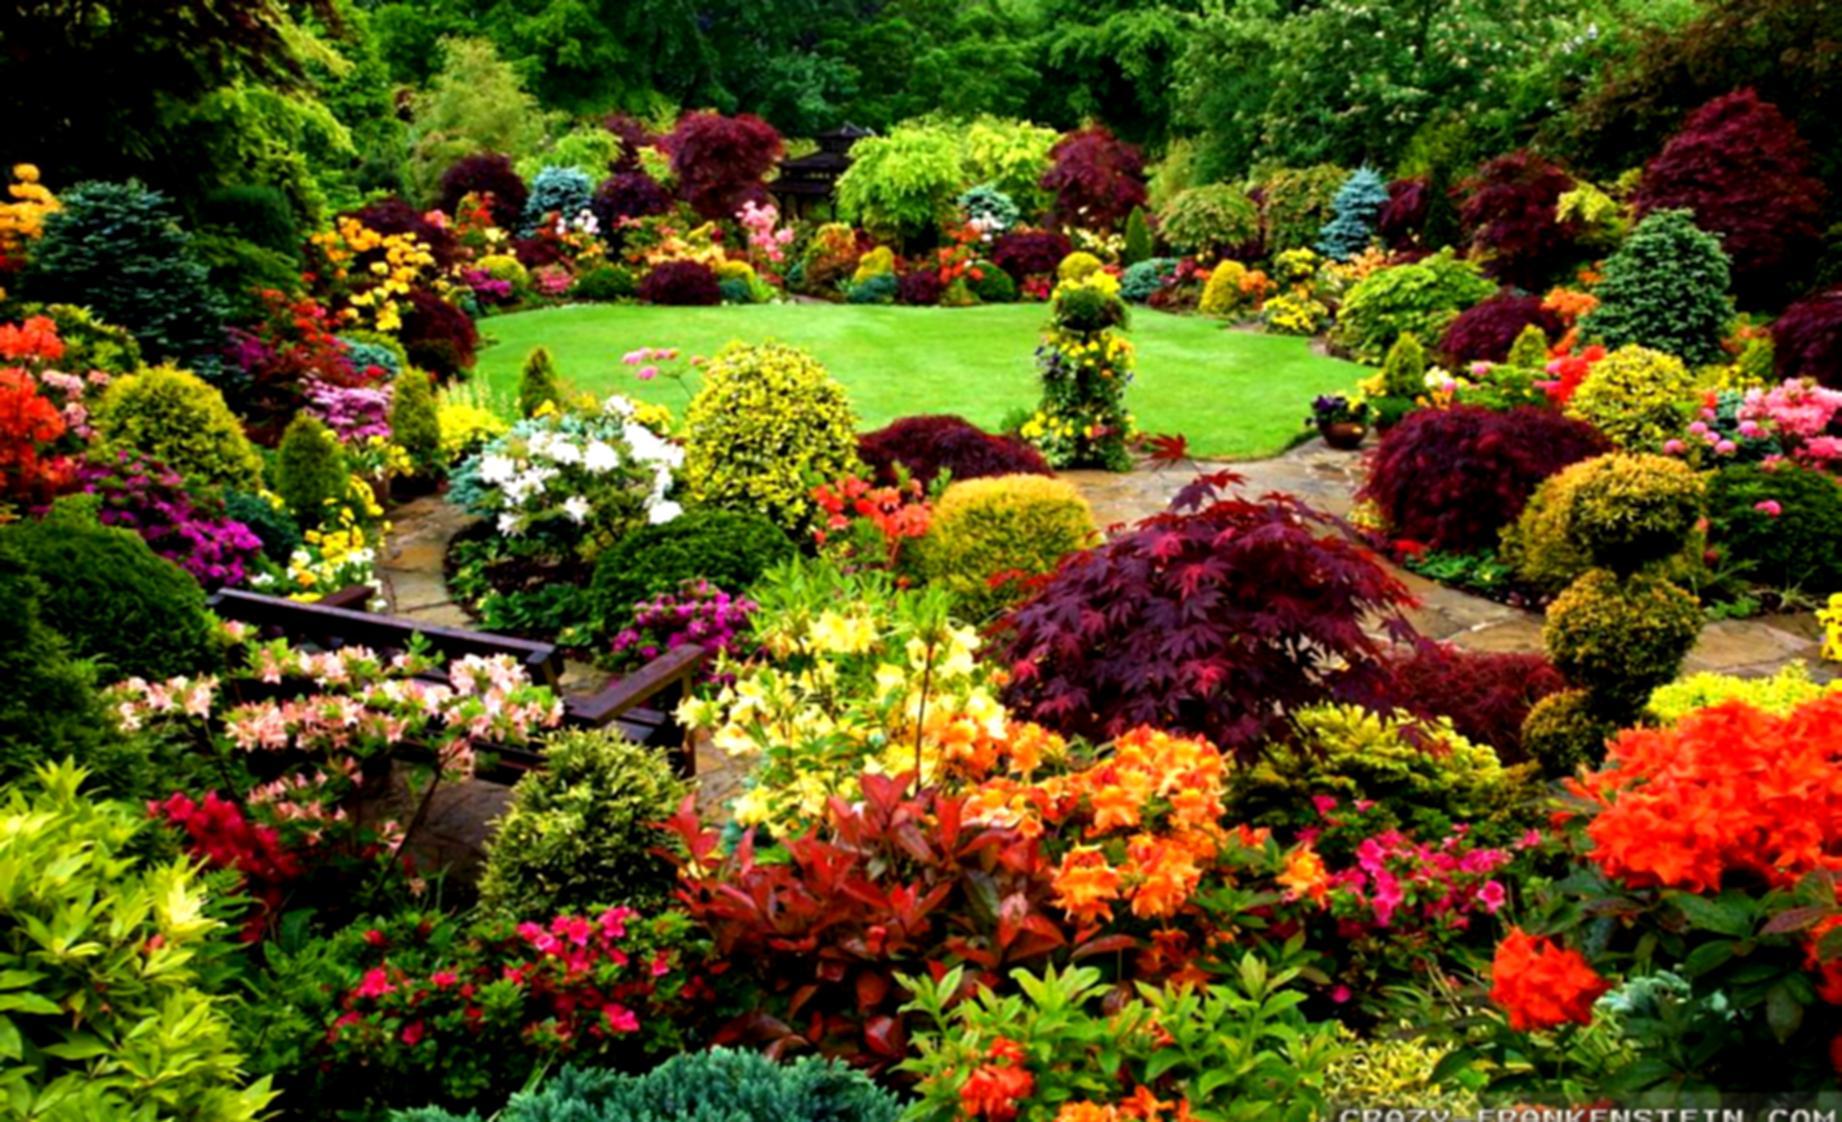 Wallpaper Amazing Beautiful Gardens With Colorful Flowers And Trees